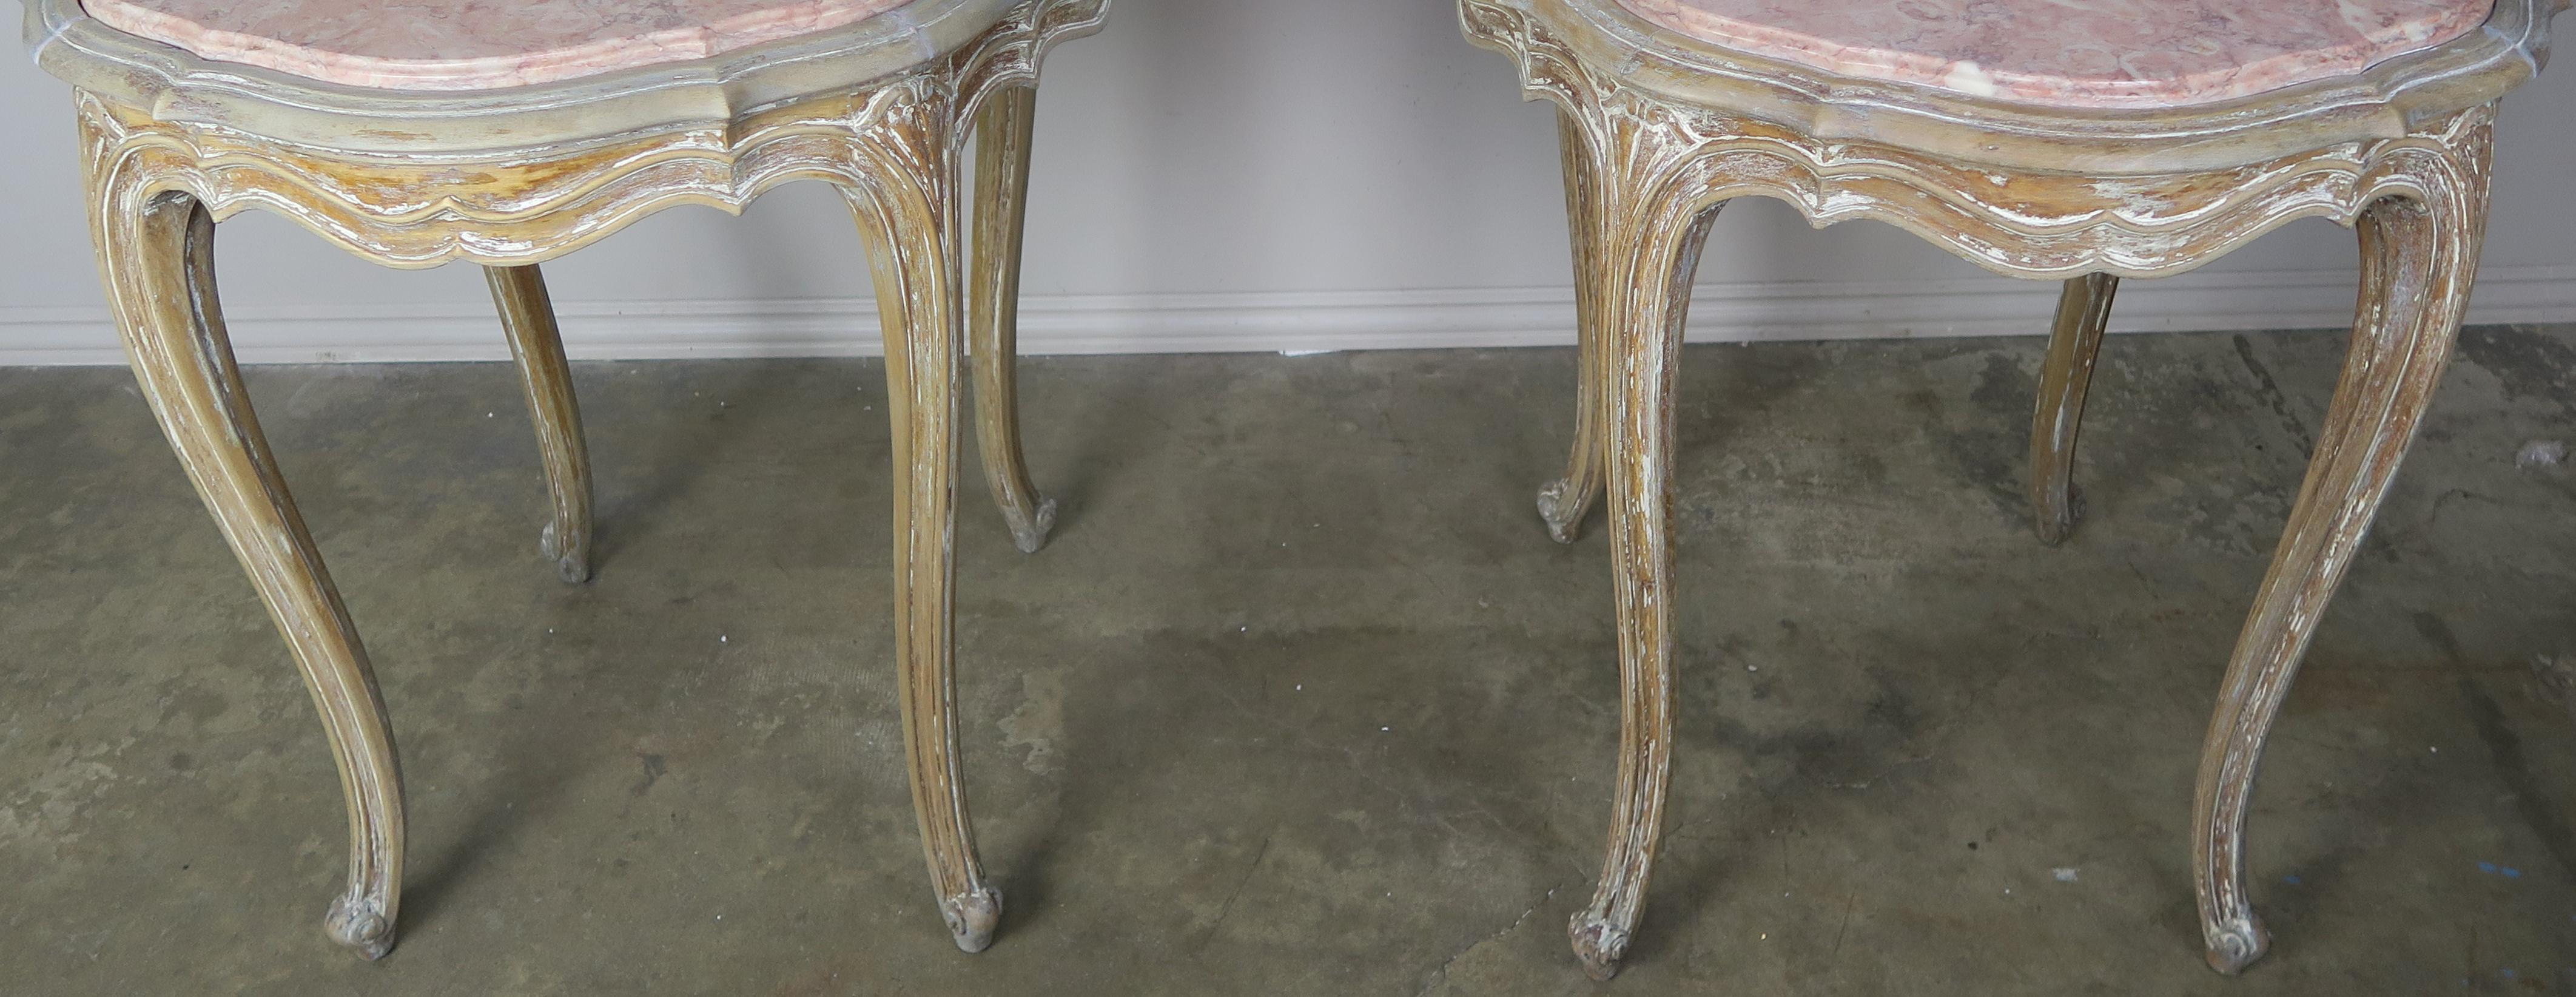 Hand-Painted Pair of French Painted Table with Marble Tops, circa 1920s